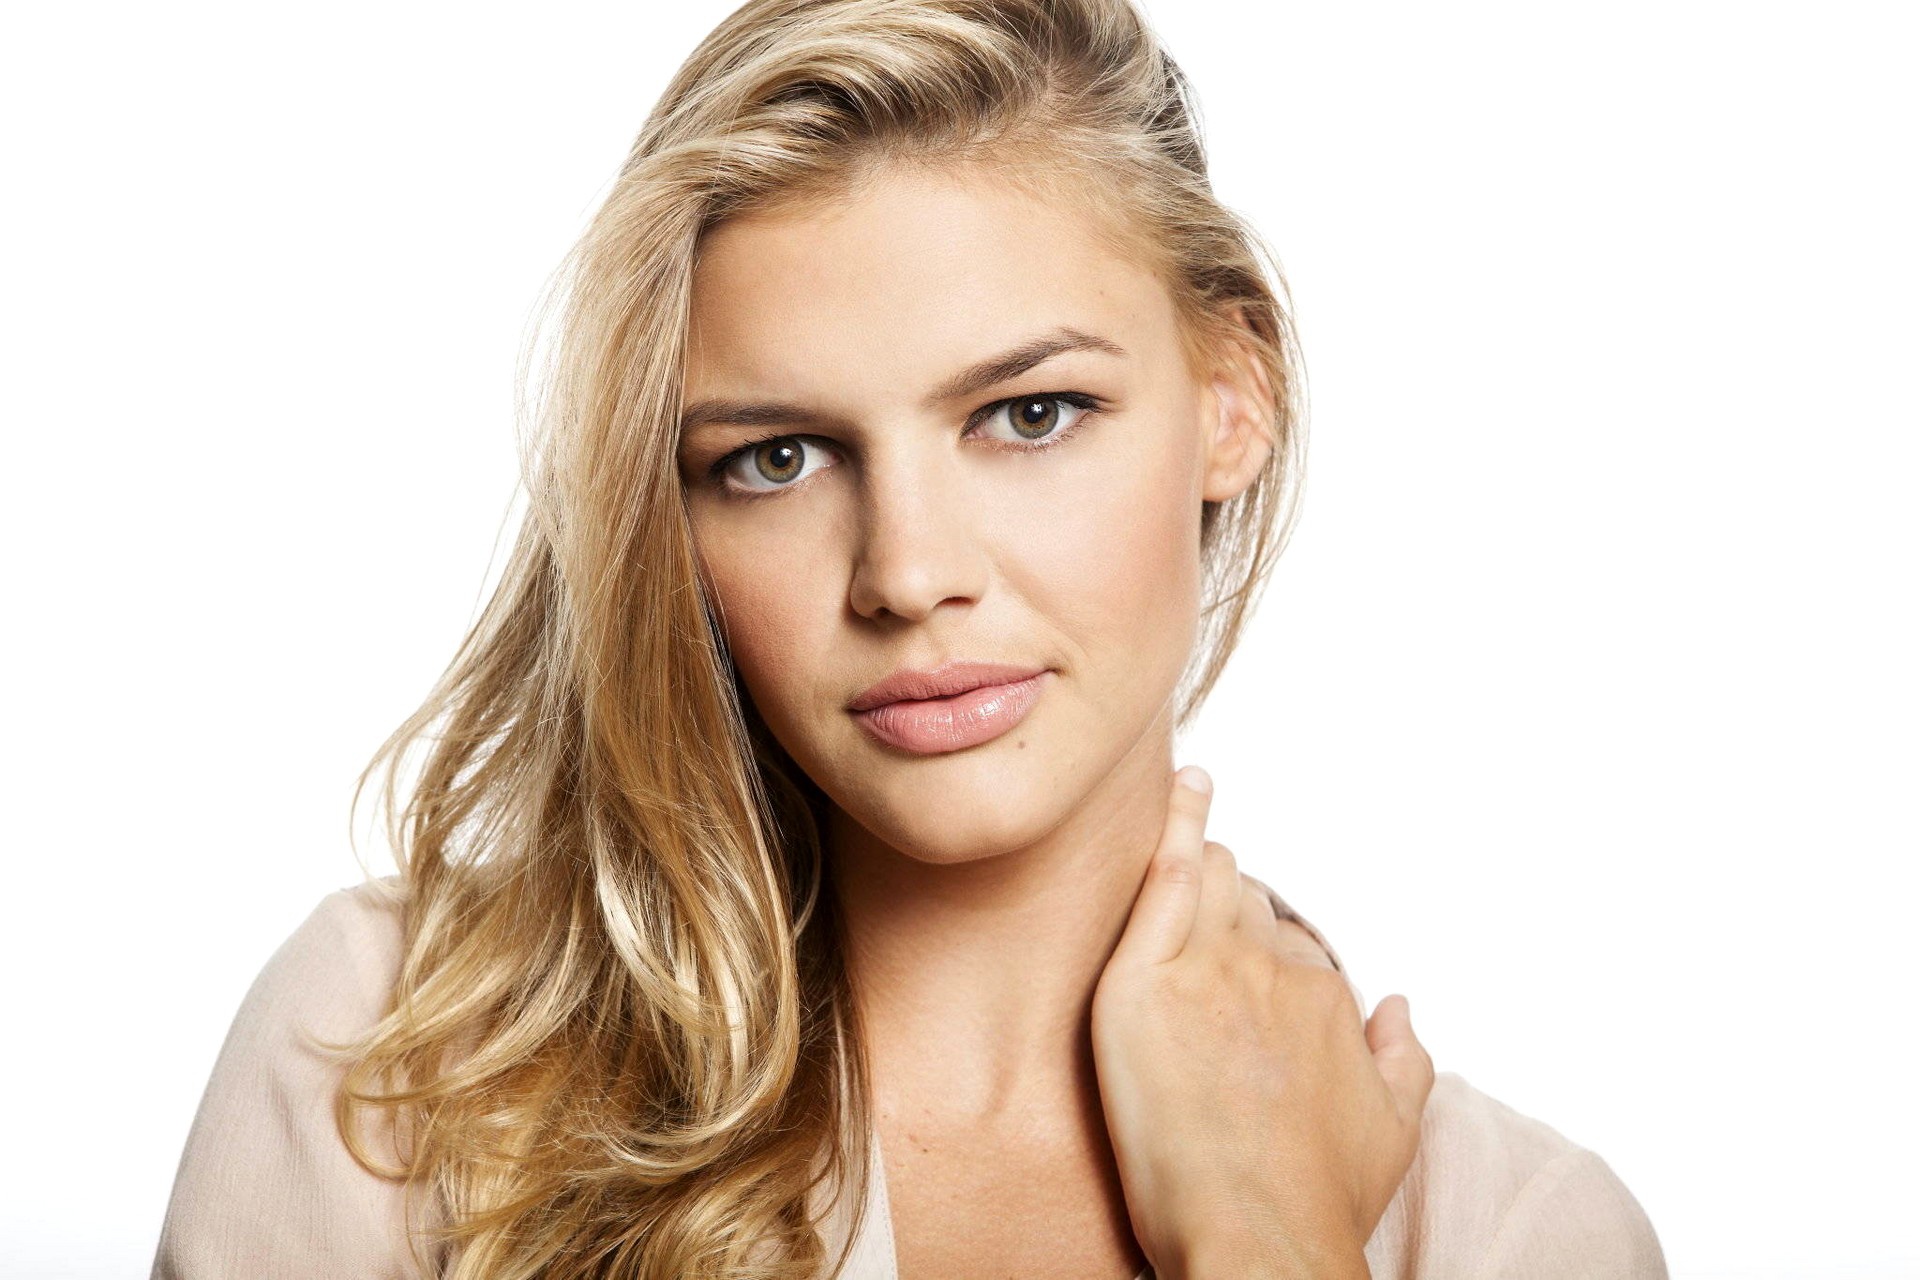 Actress American Blonde Kelly Rohrbach Smile 1920x1280